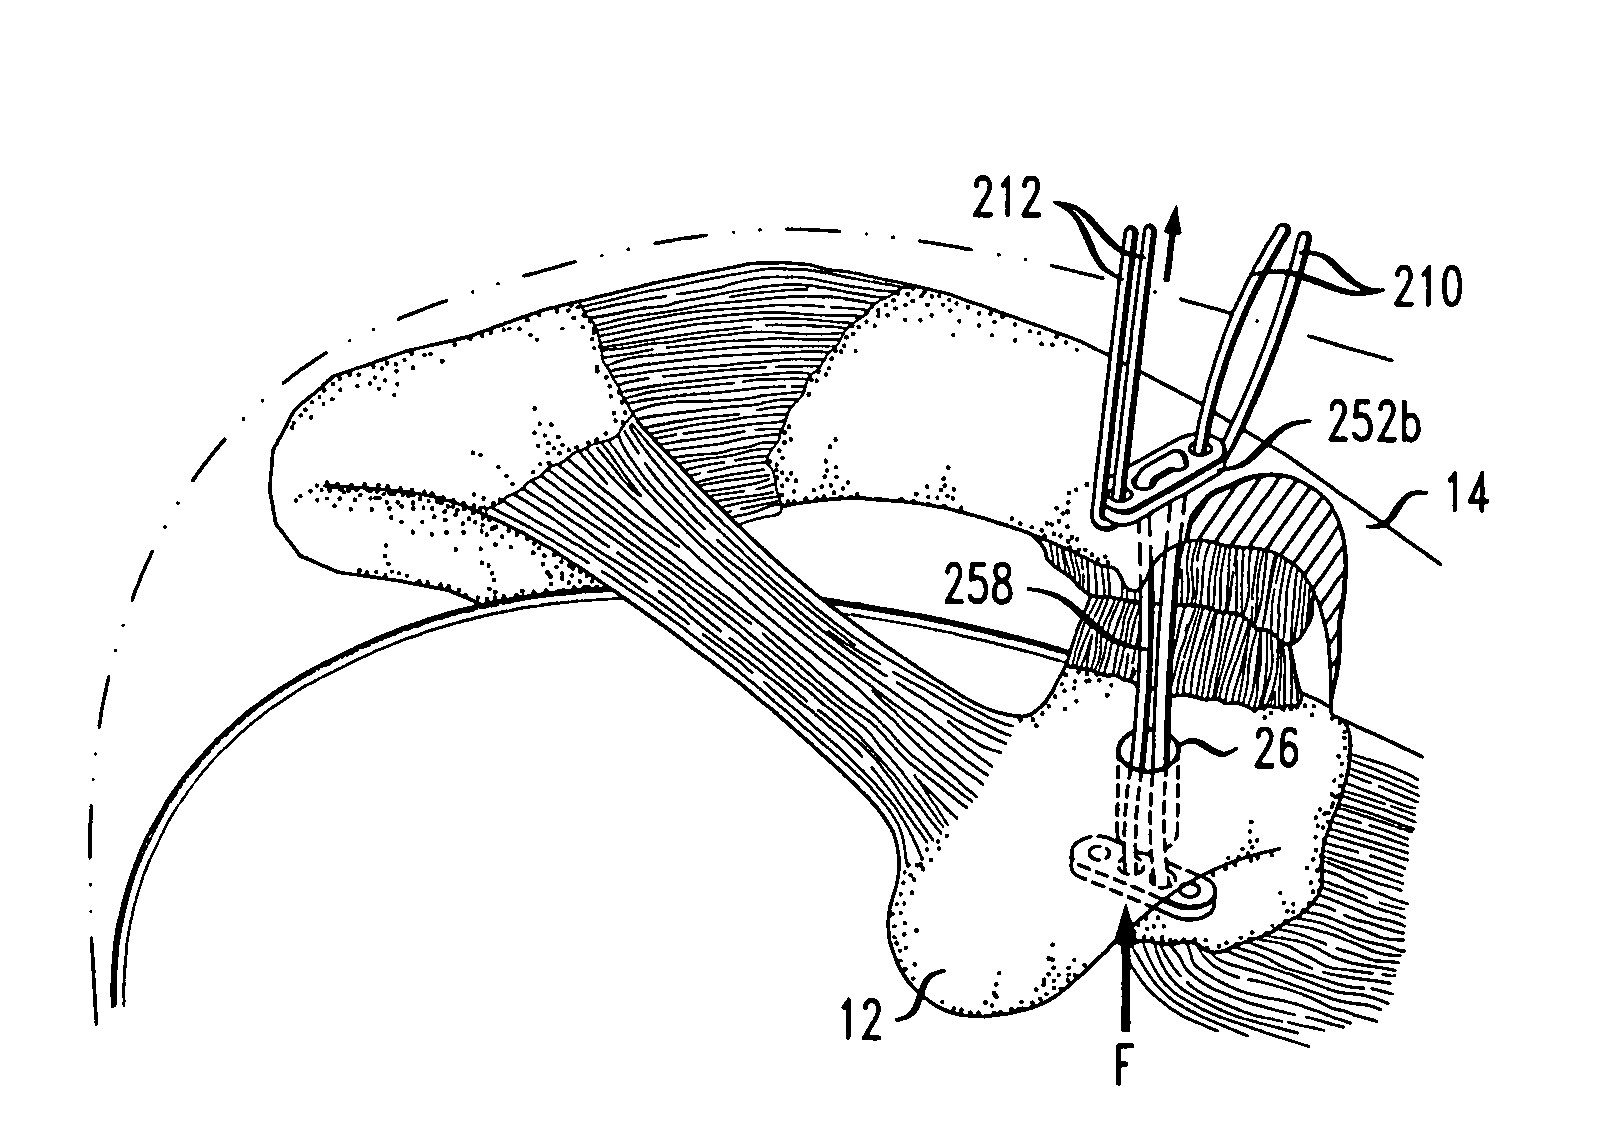 Device for treatment of acromioclavicular joint dislocations